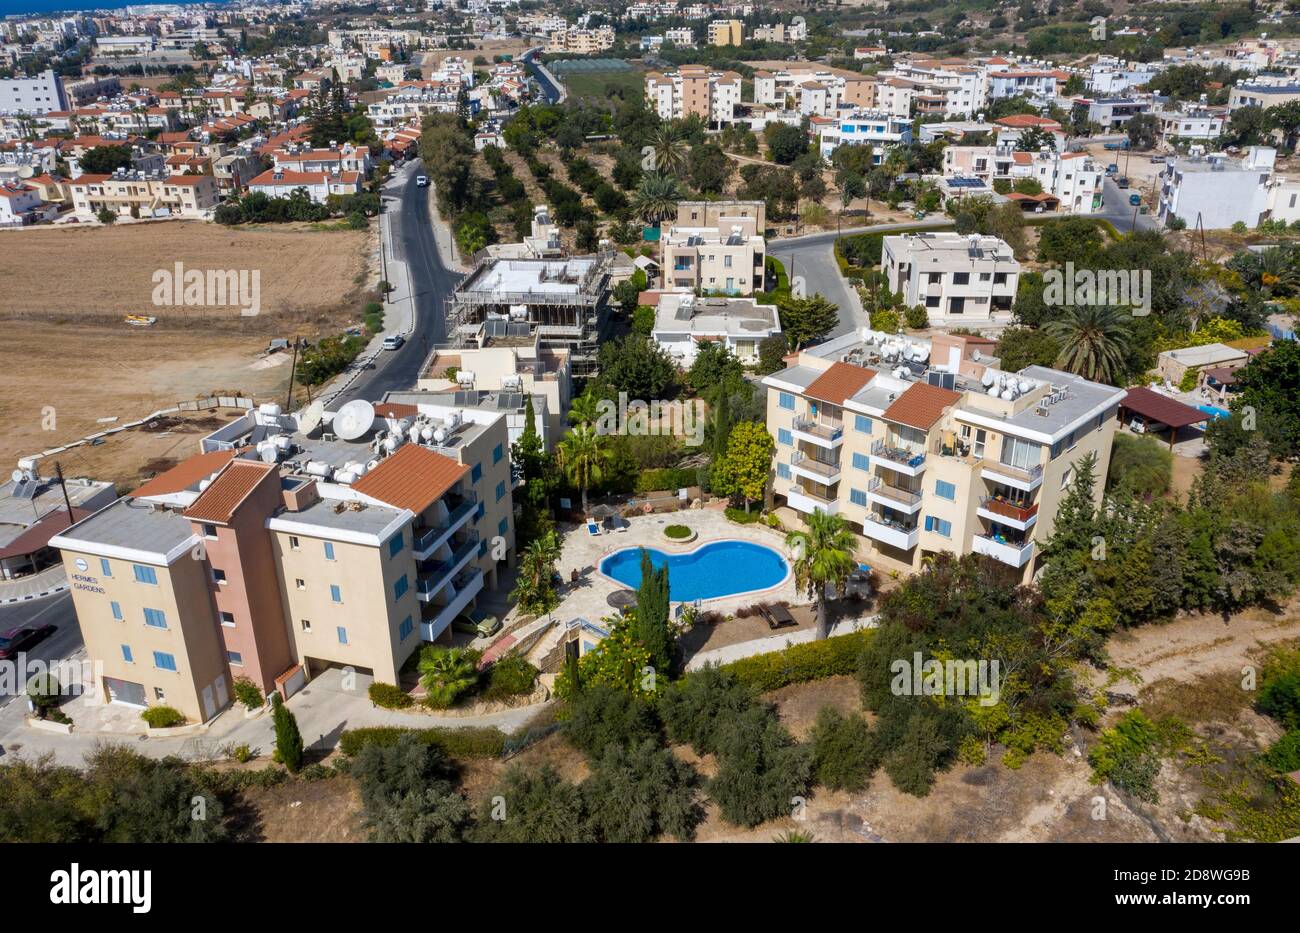 Aerial view of Hermes Gardens apartments, Kato Pervolian, Paphos, Cyprus.The apartments are a typical example of holiday rental apartments in Cyprus. Stock Photo